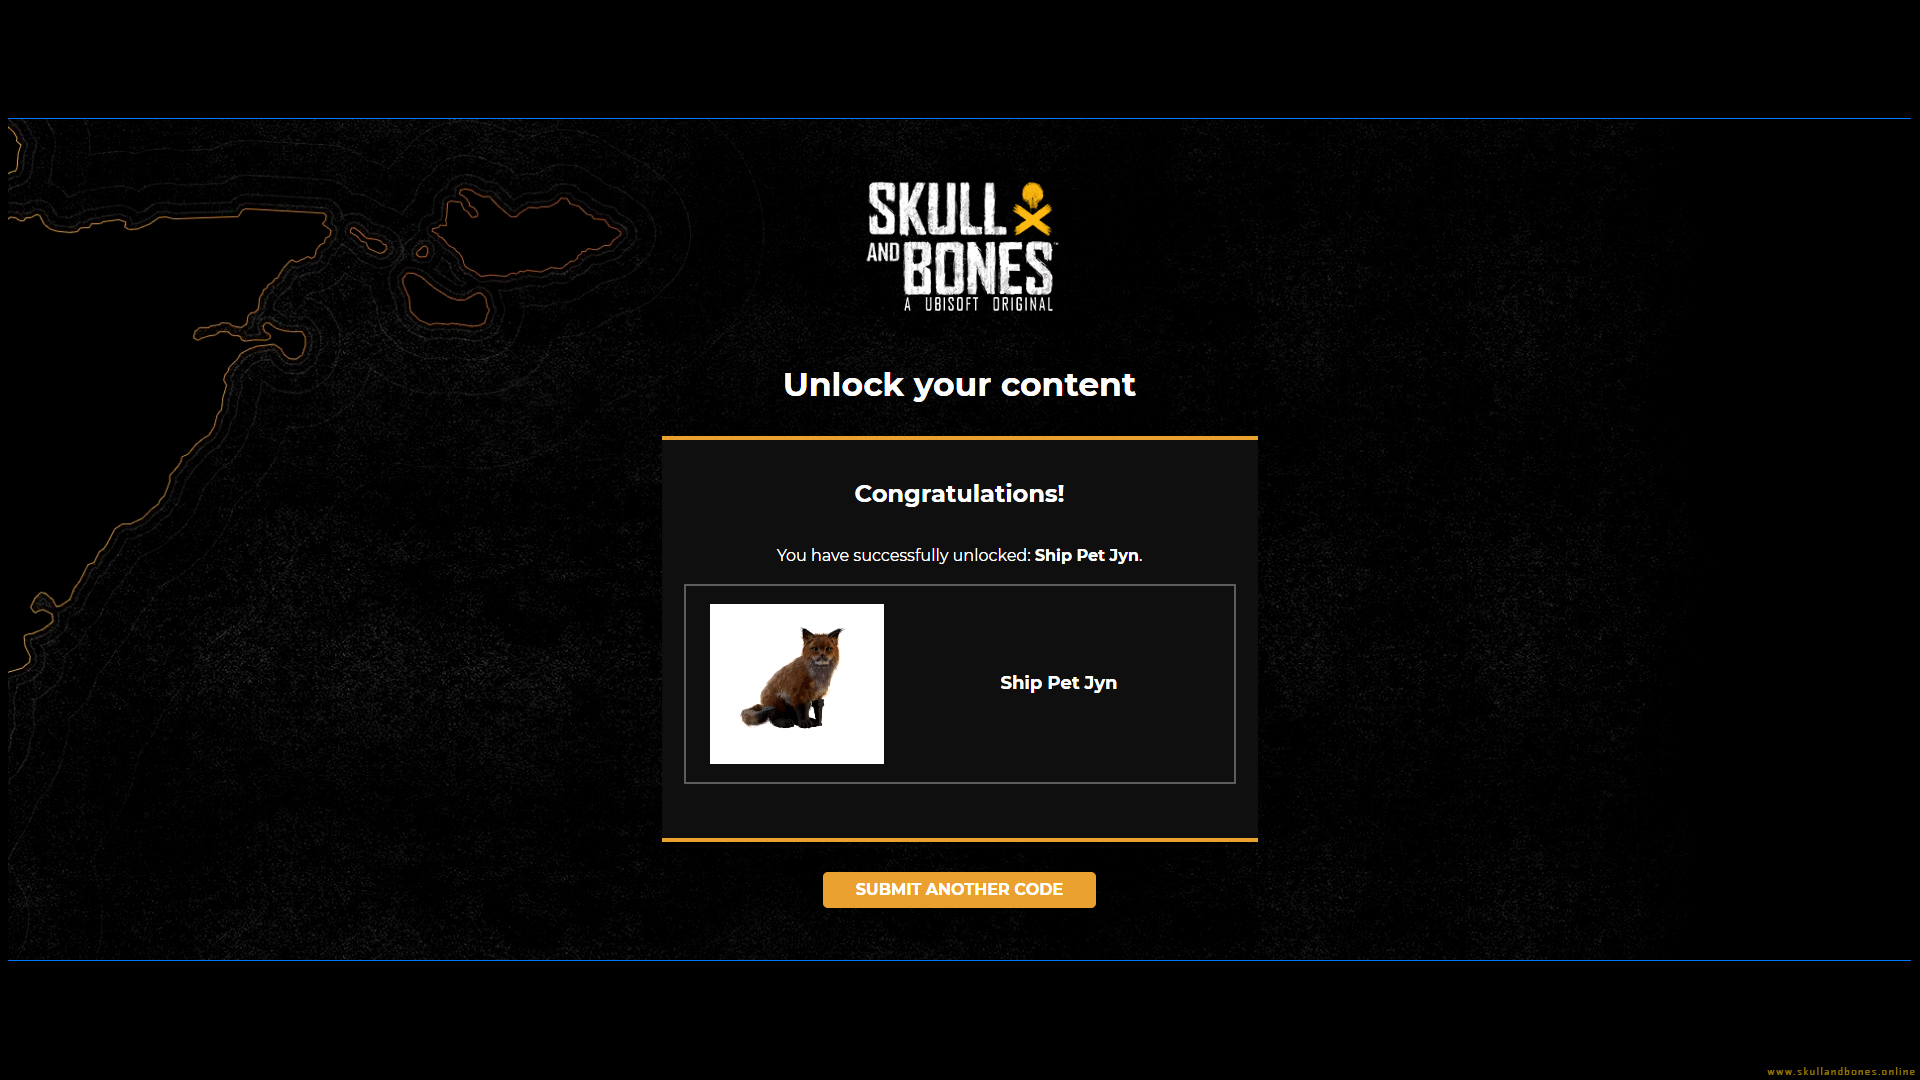 Skull and Bones - Get Ship Pet Jyn FOR FREE